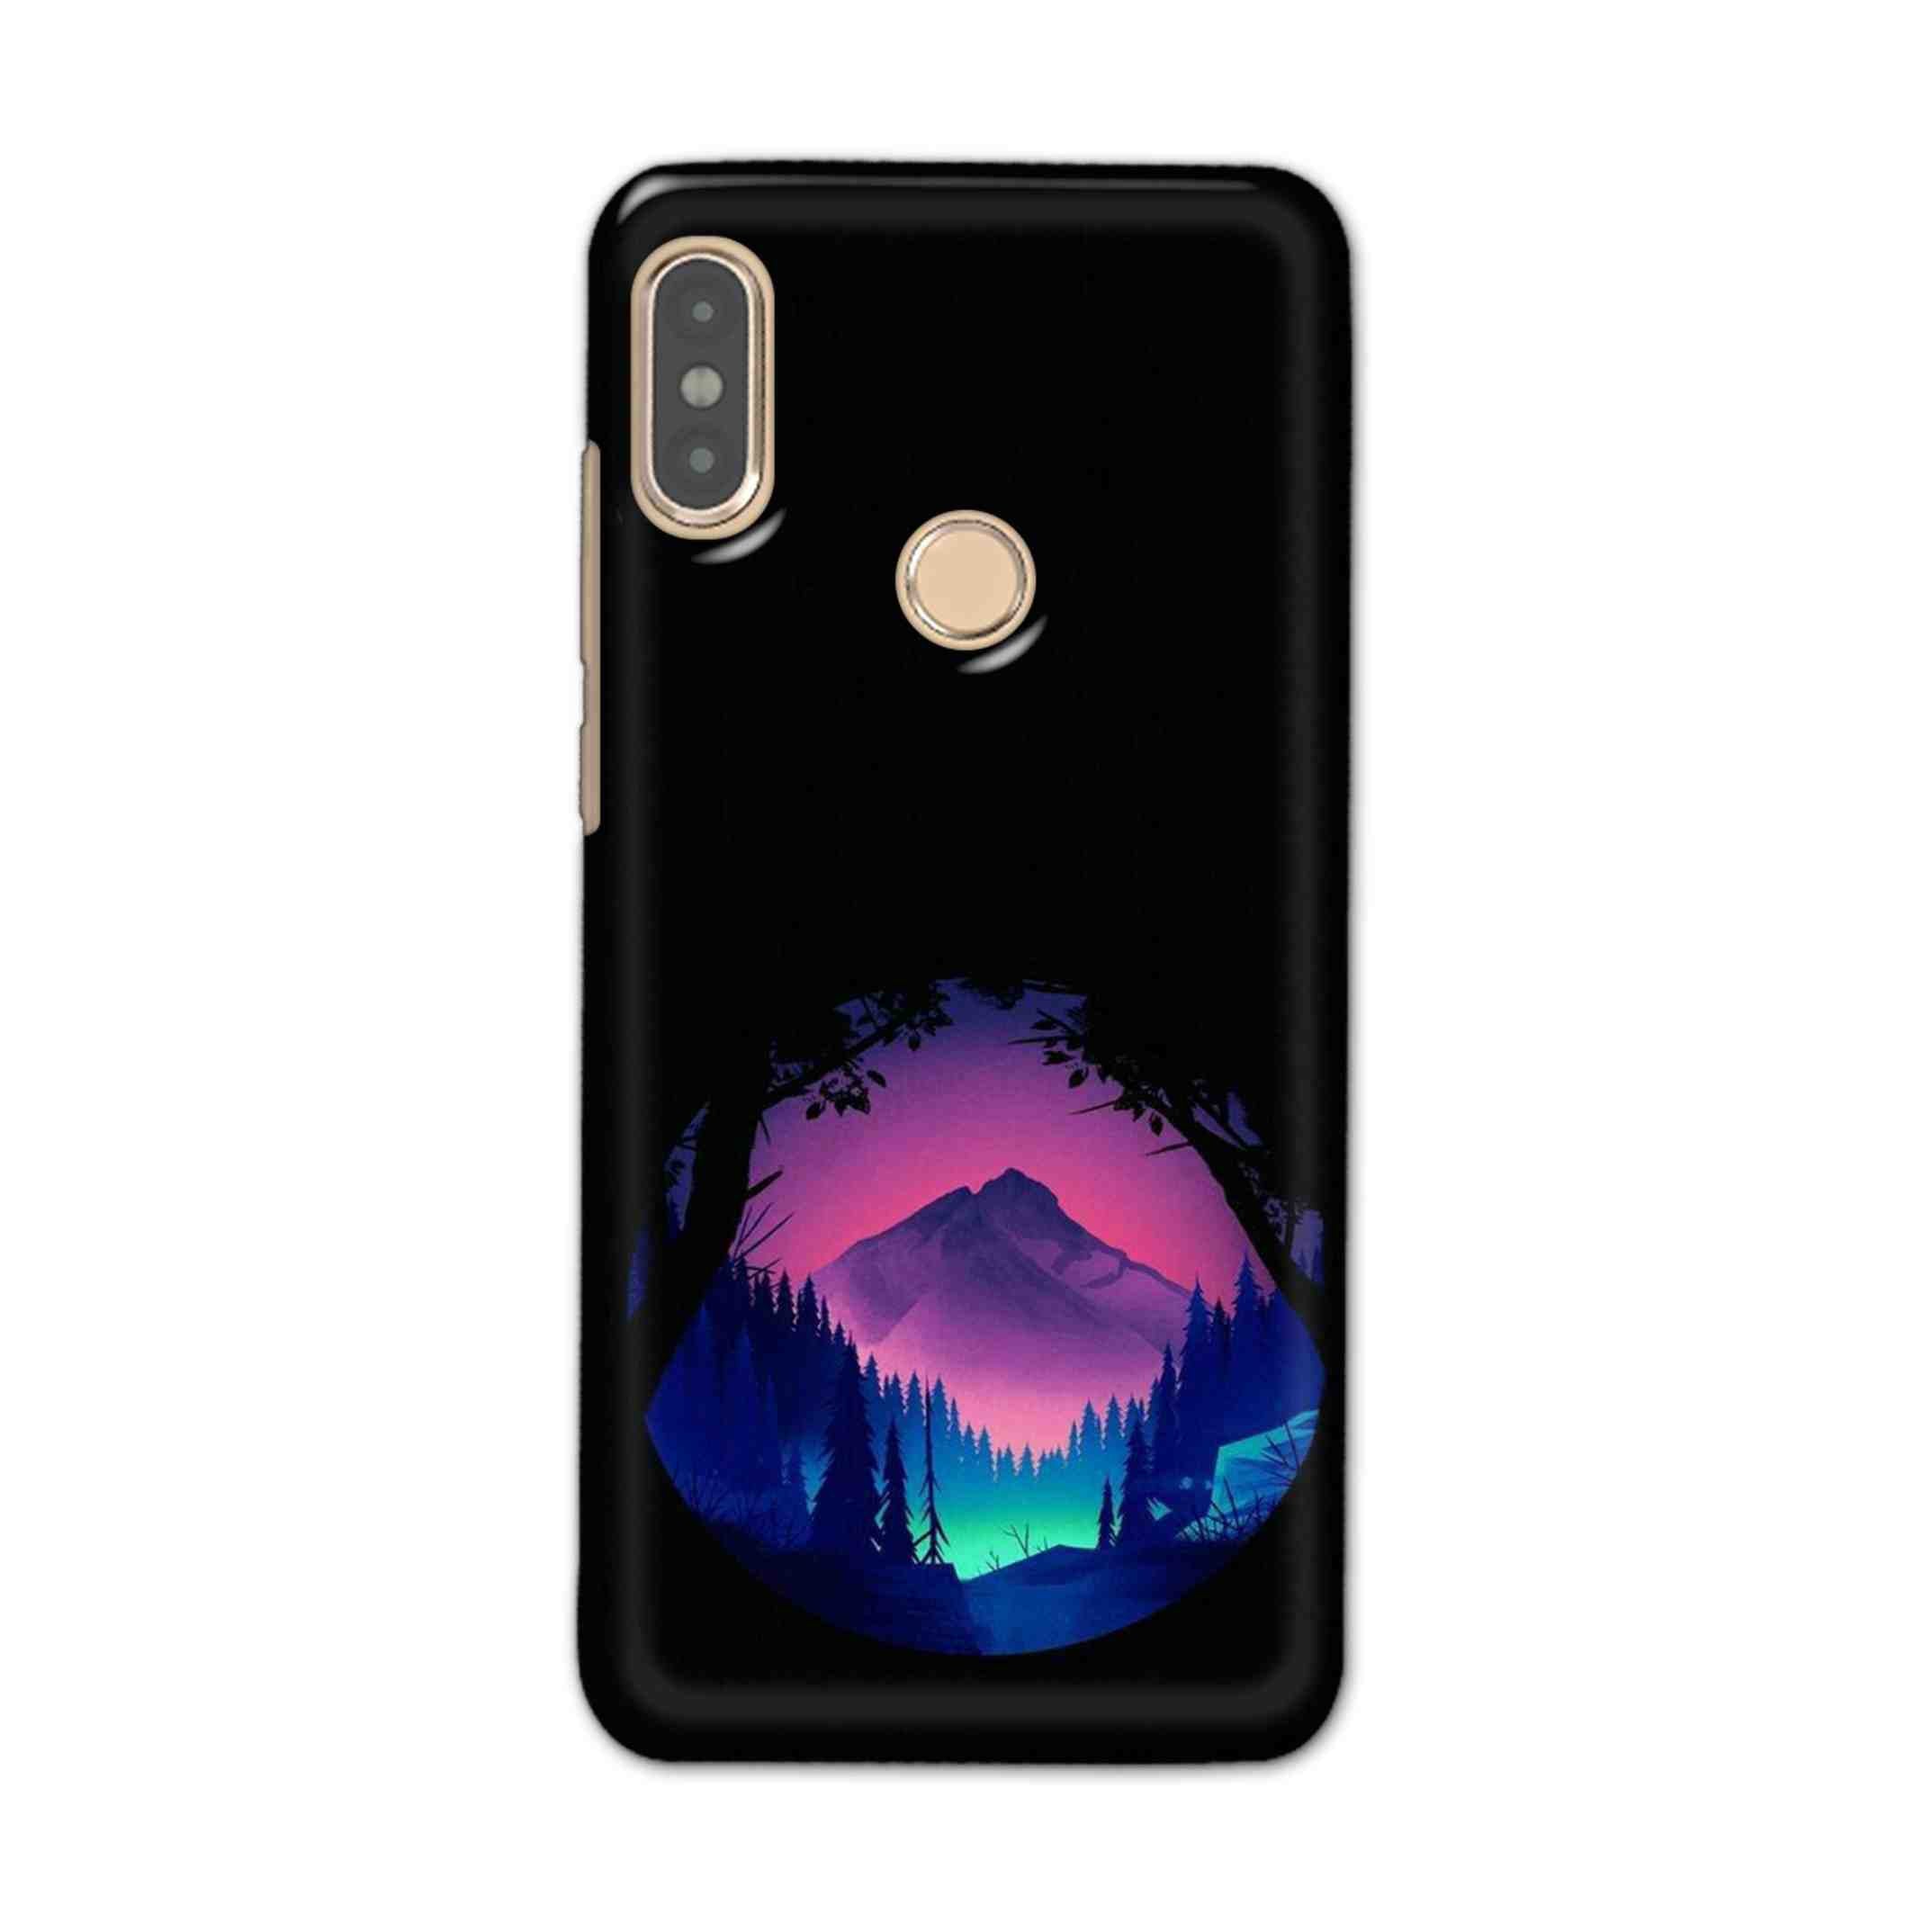 Buy Neon Tables Hard Back Mobile Phone Case Cover For Xiaomi Redmi Note 5 Pro Online